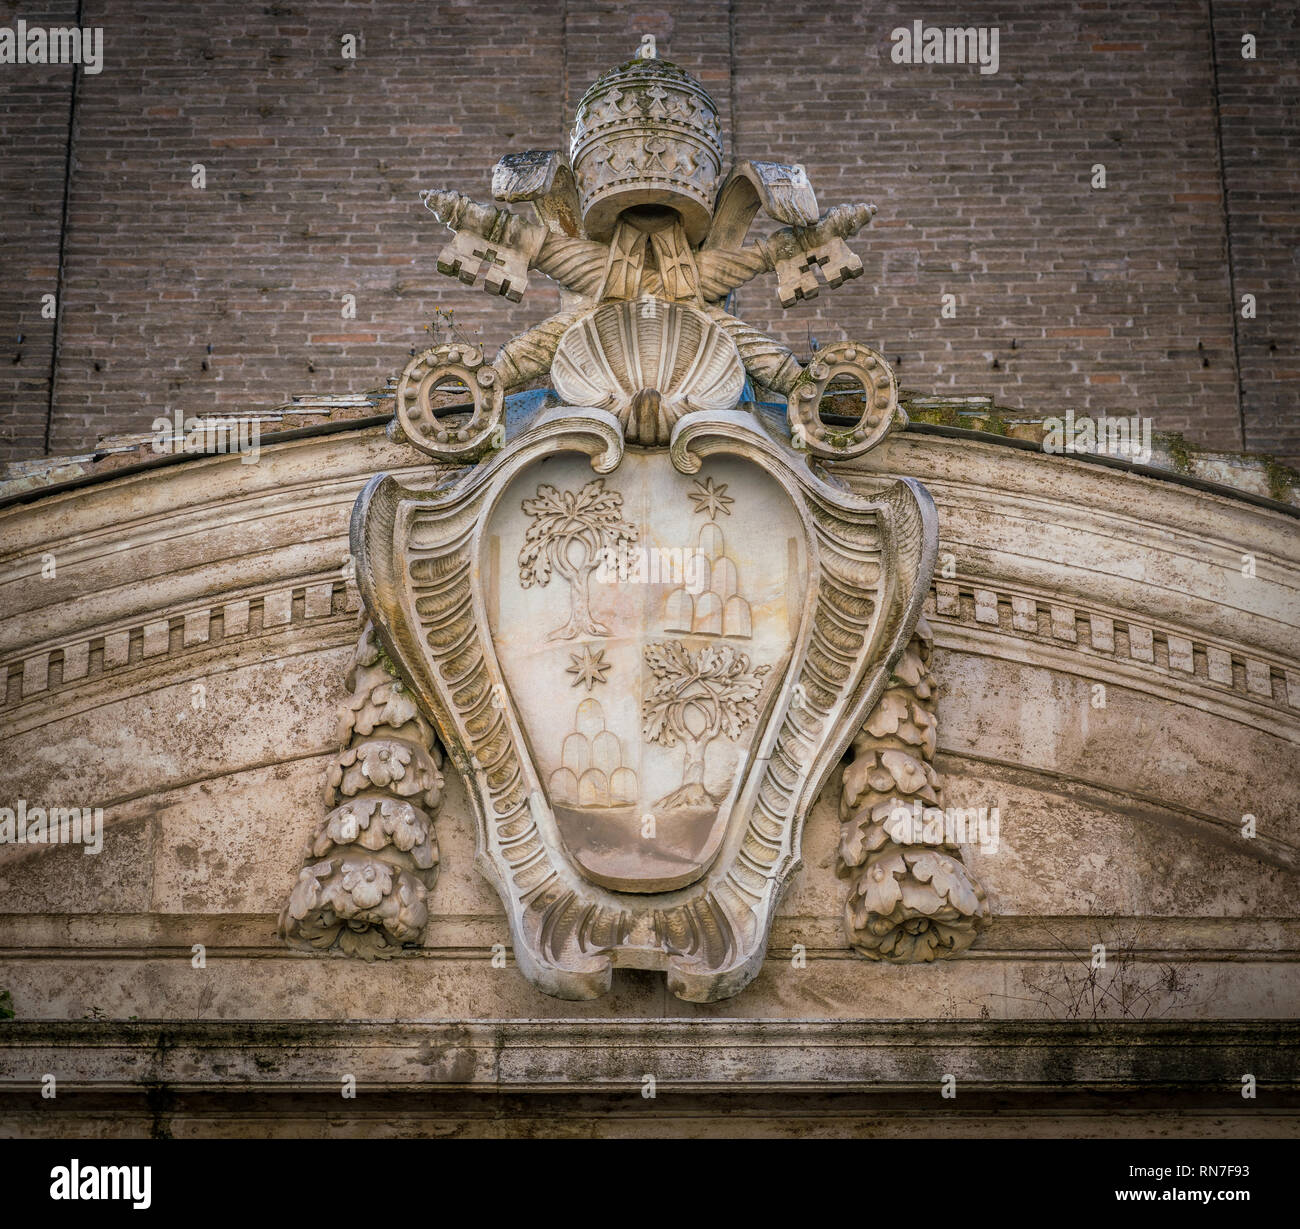 Alexander VII coat of arms on the exterior of the Church of Santo Spirito in Sassia. Rome, Italy. Stock Photo